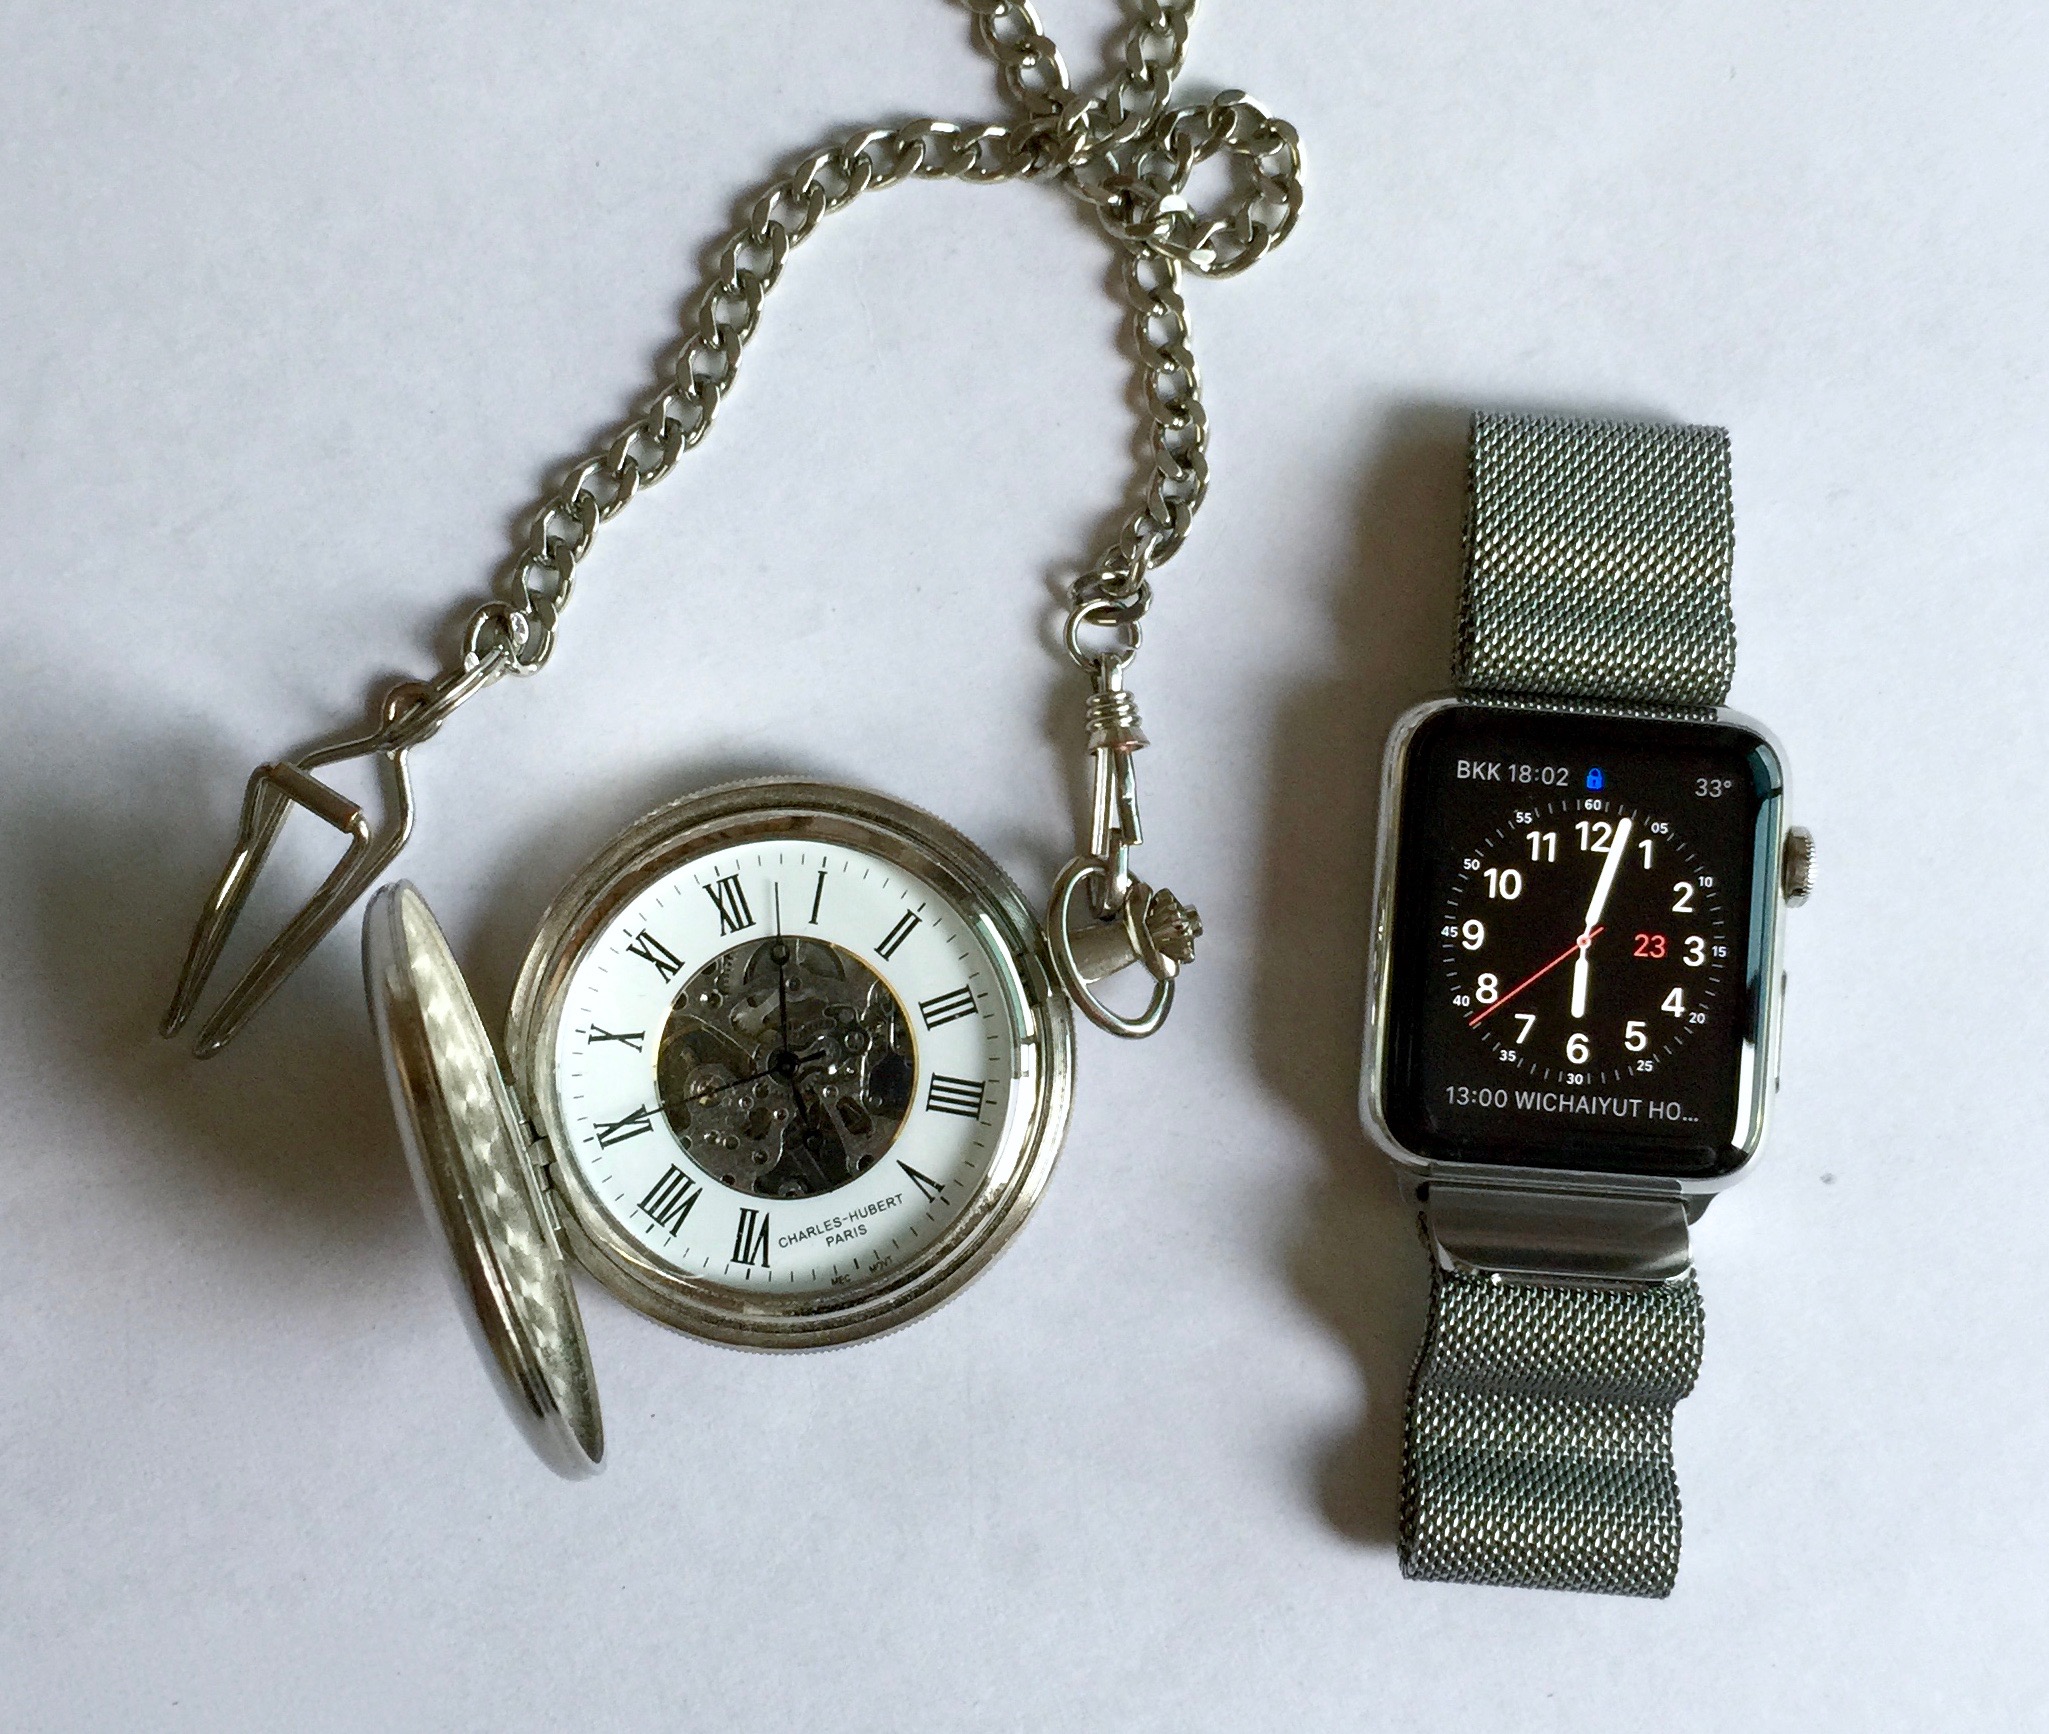 Apple Watch and pocket watch